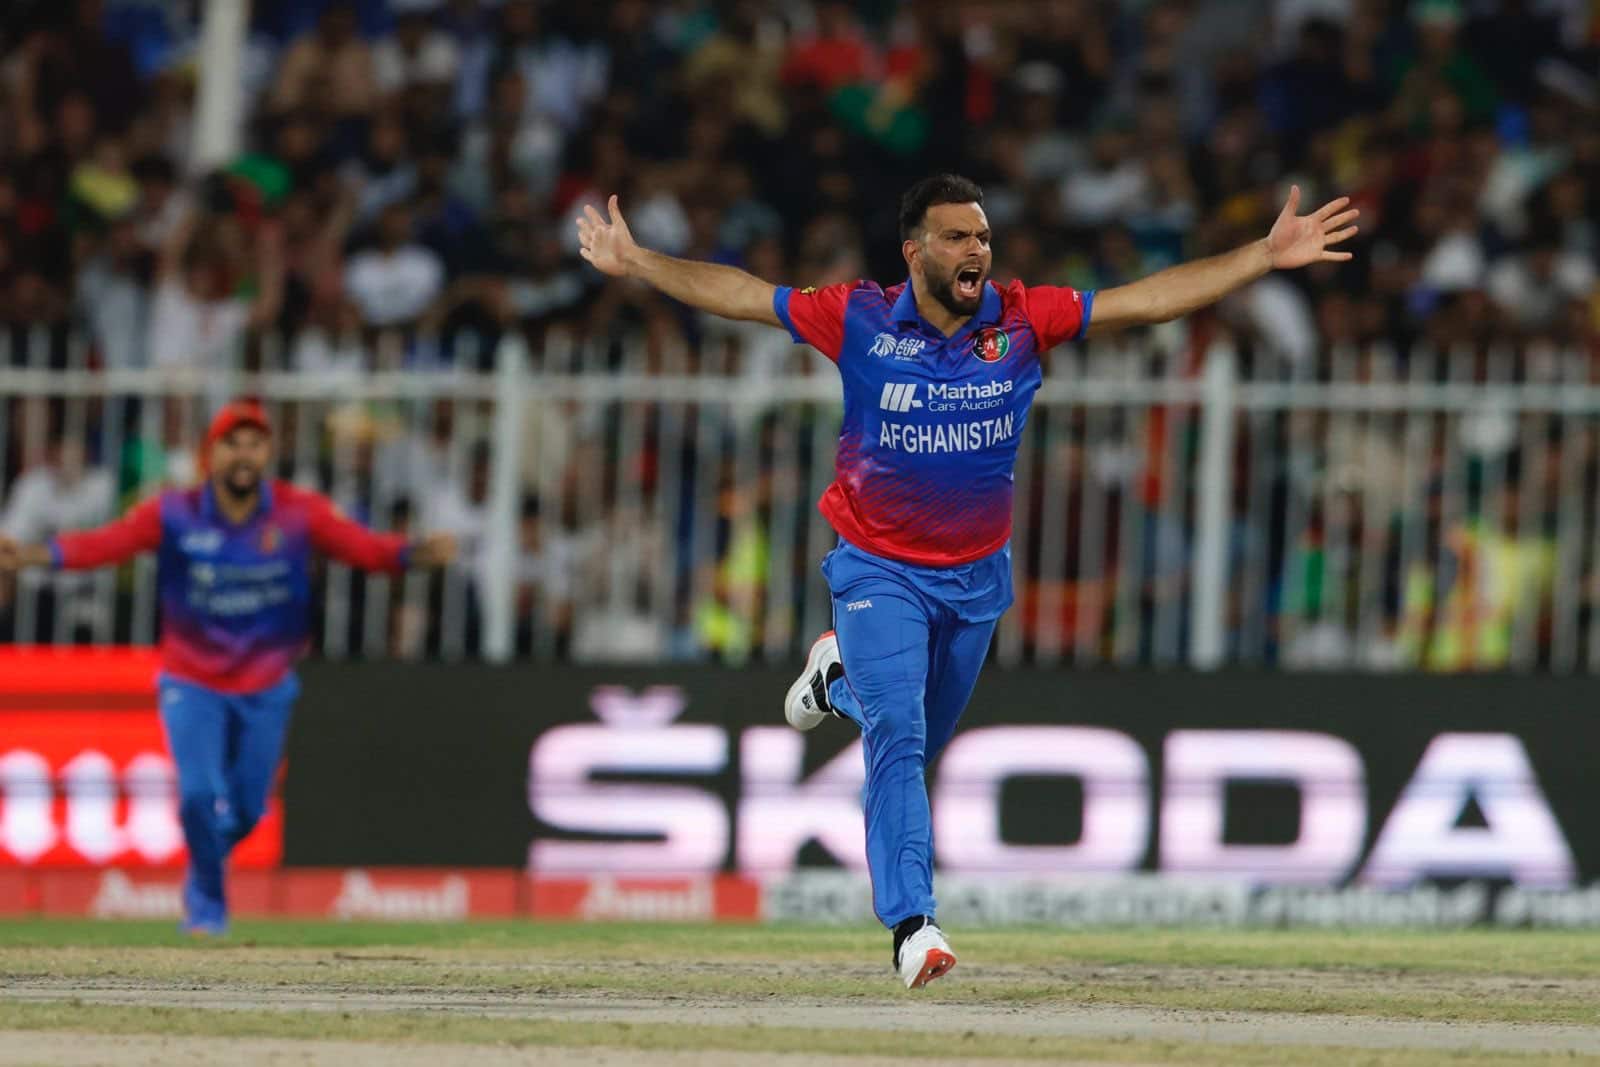 Afghanistan's assistant coach shares his views on team's performance